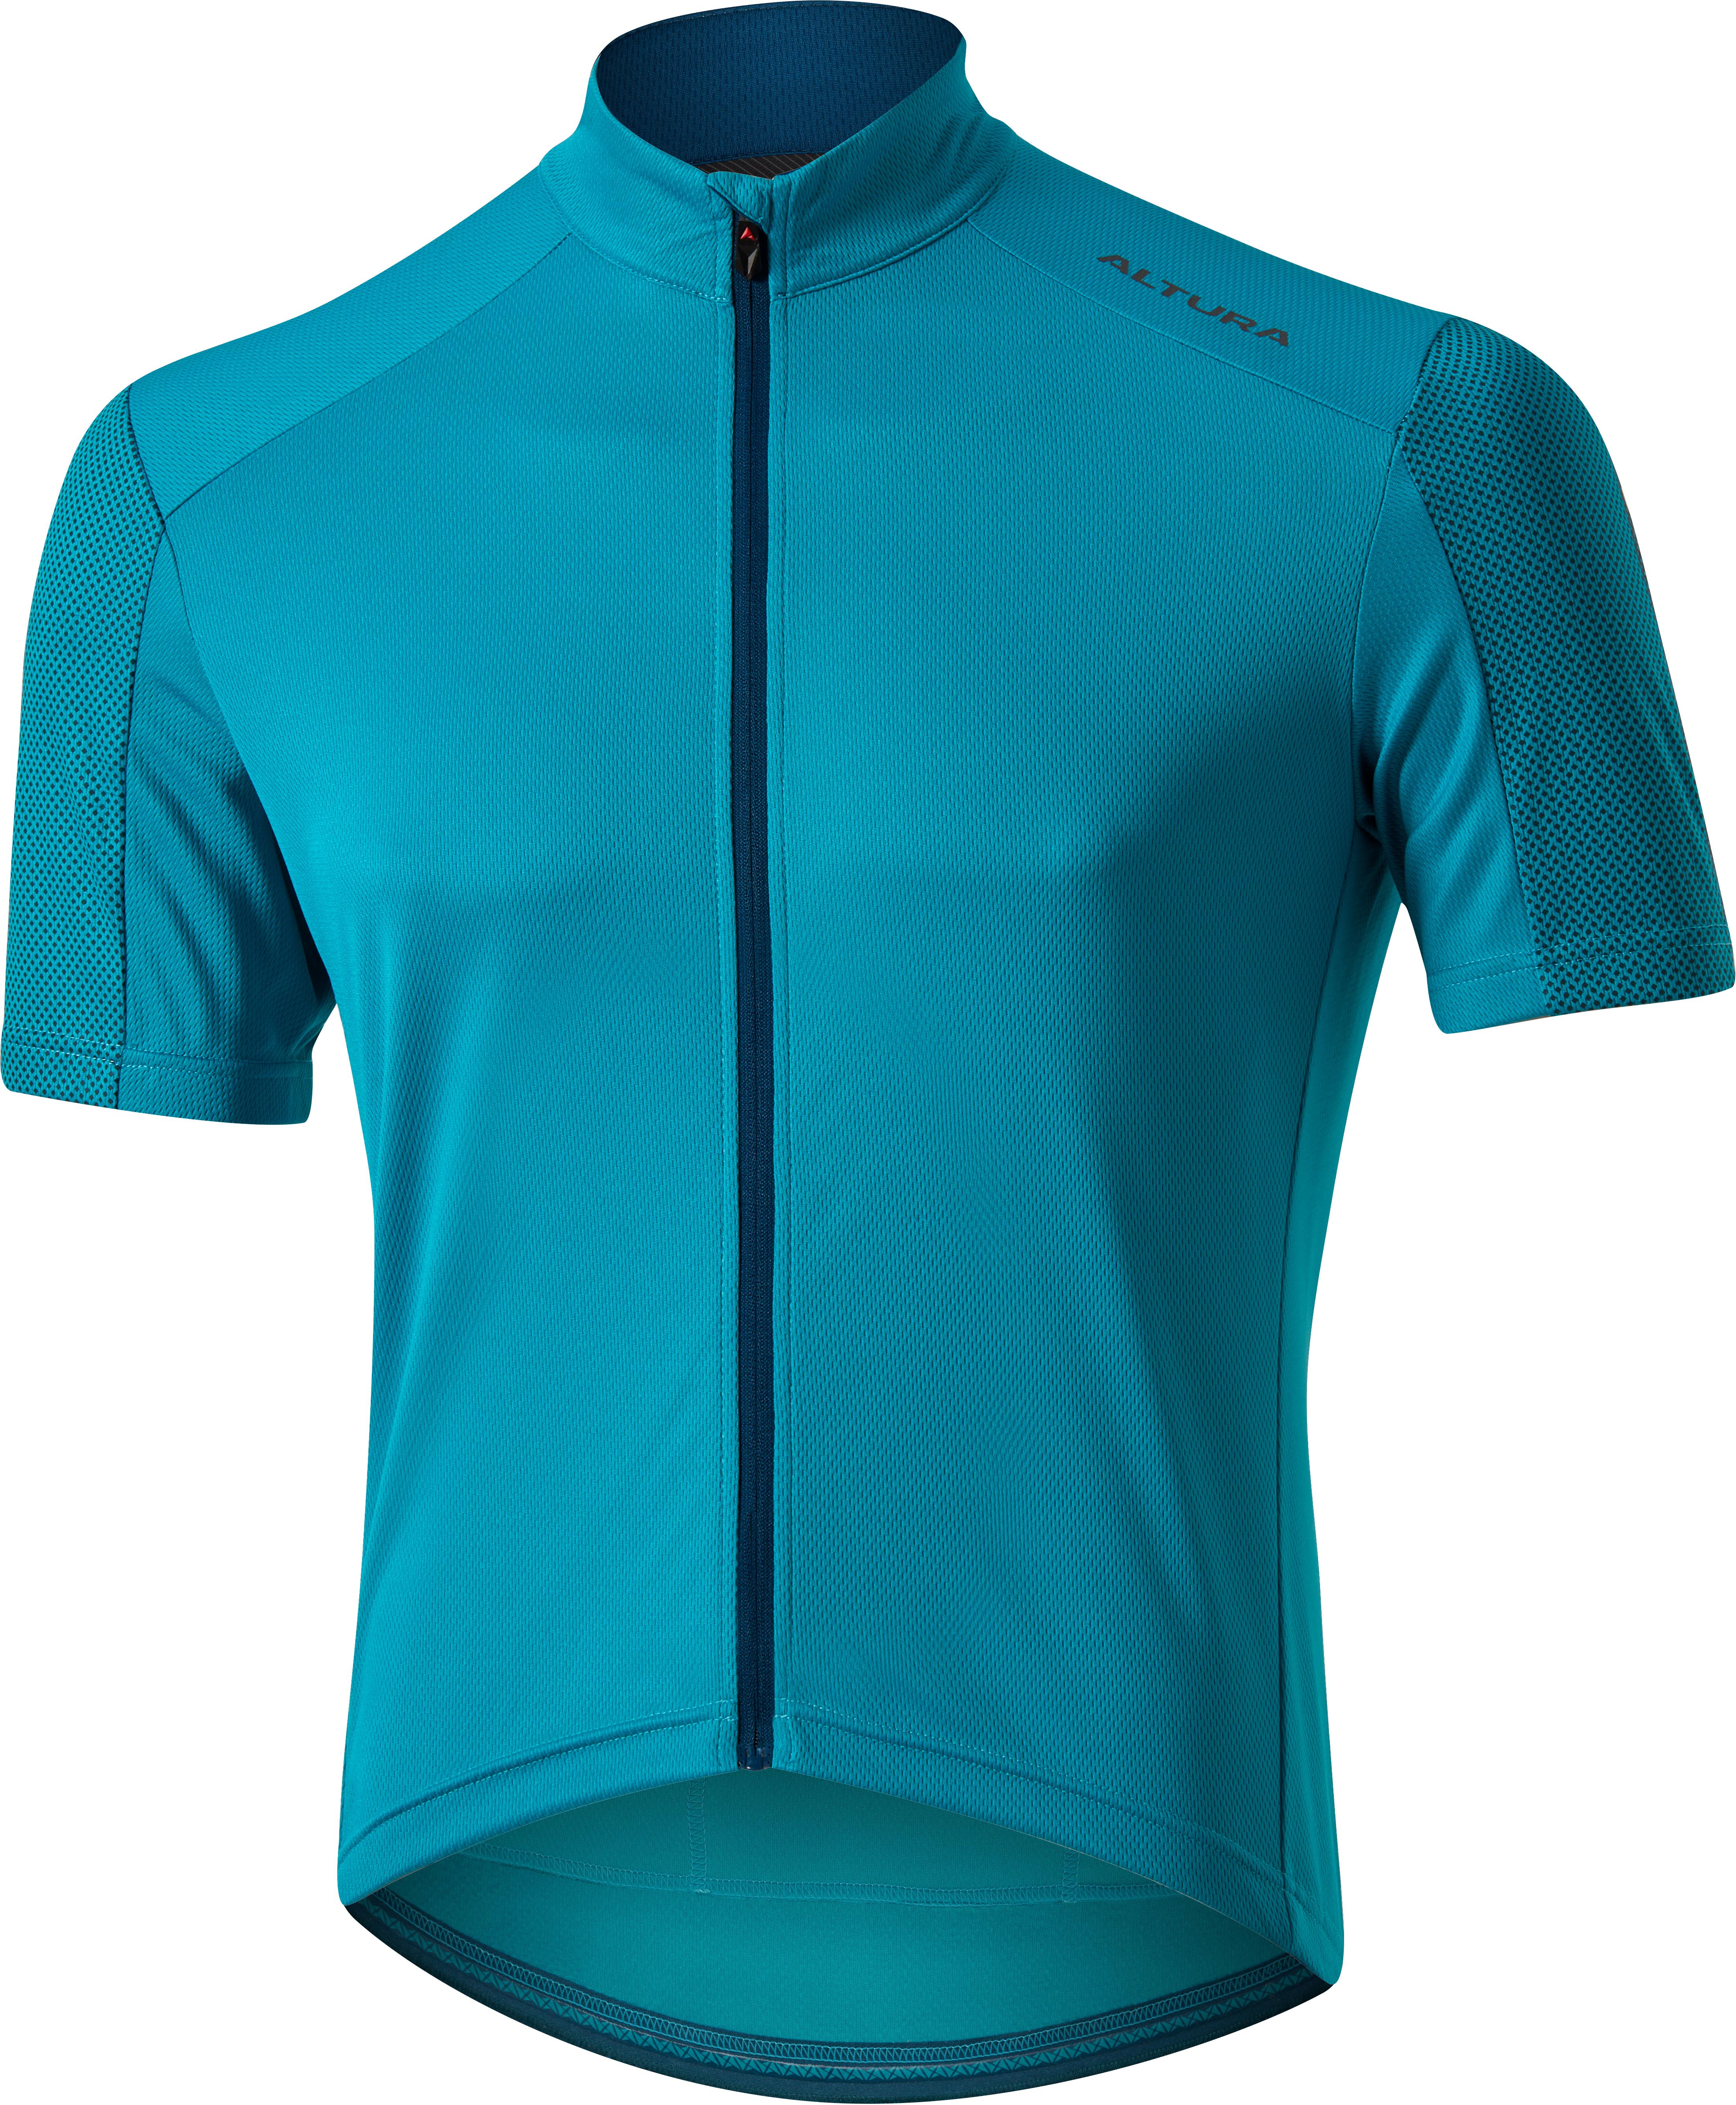 Altura Nightvision Short Sleeve Jersey - Caneel Bay - Large